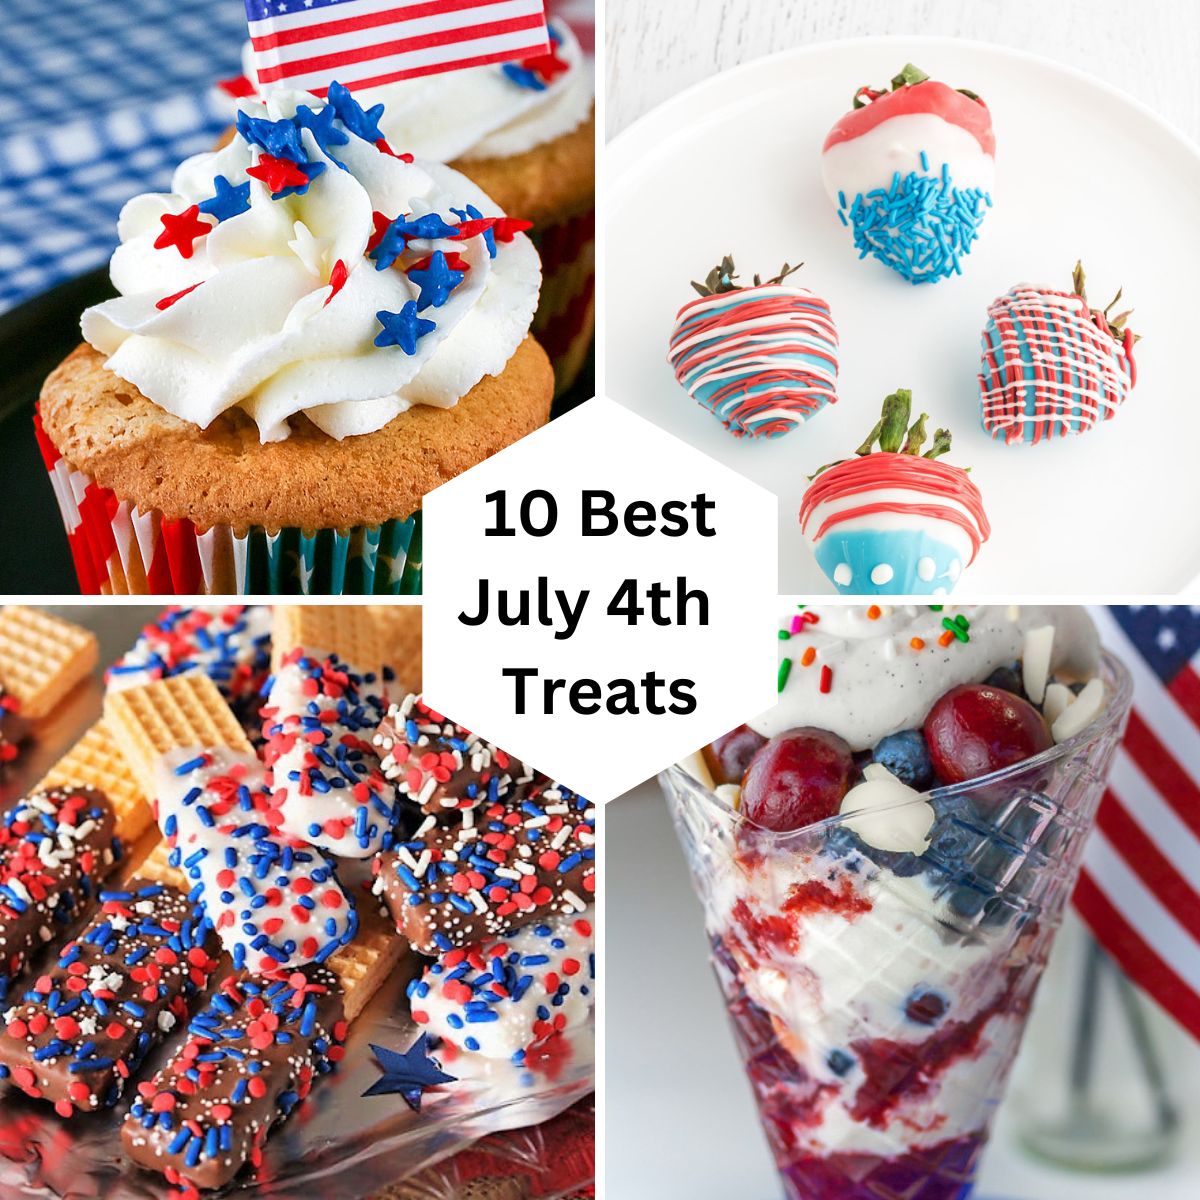 Collection of 10 of the Best 4th of July Chocolate Treats compiled by Jane Bonacci, The Heritage Cook. 